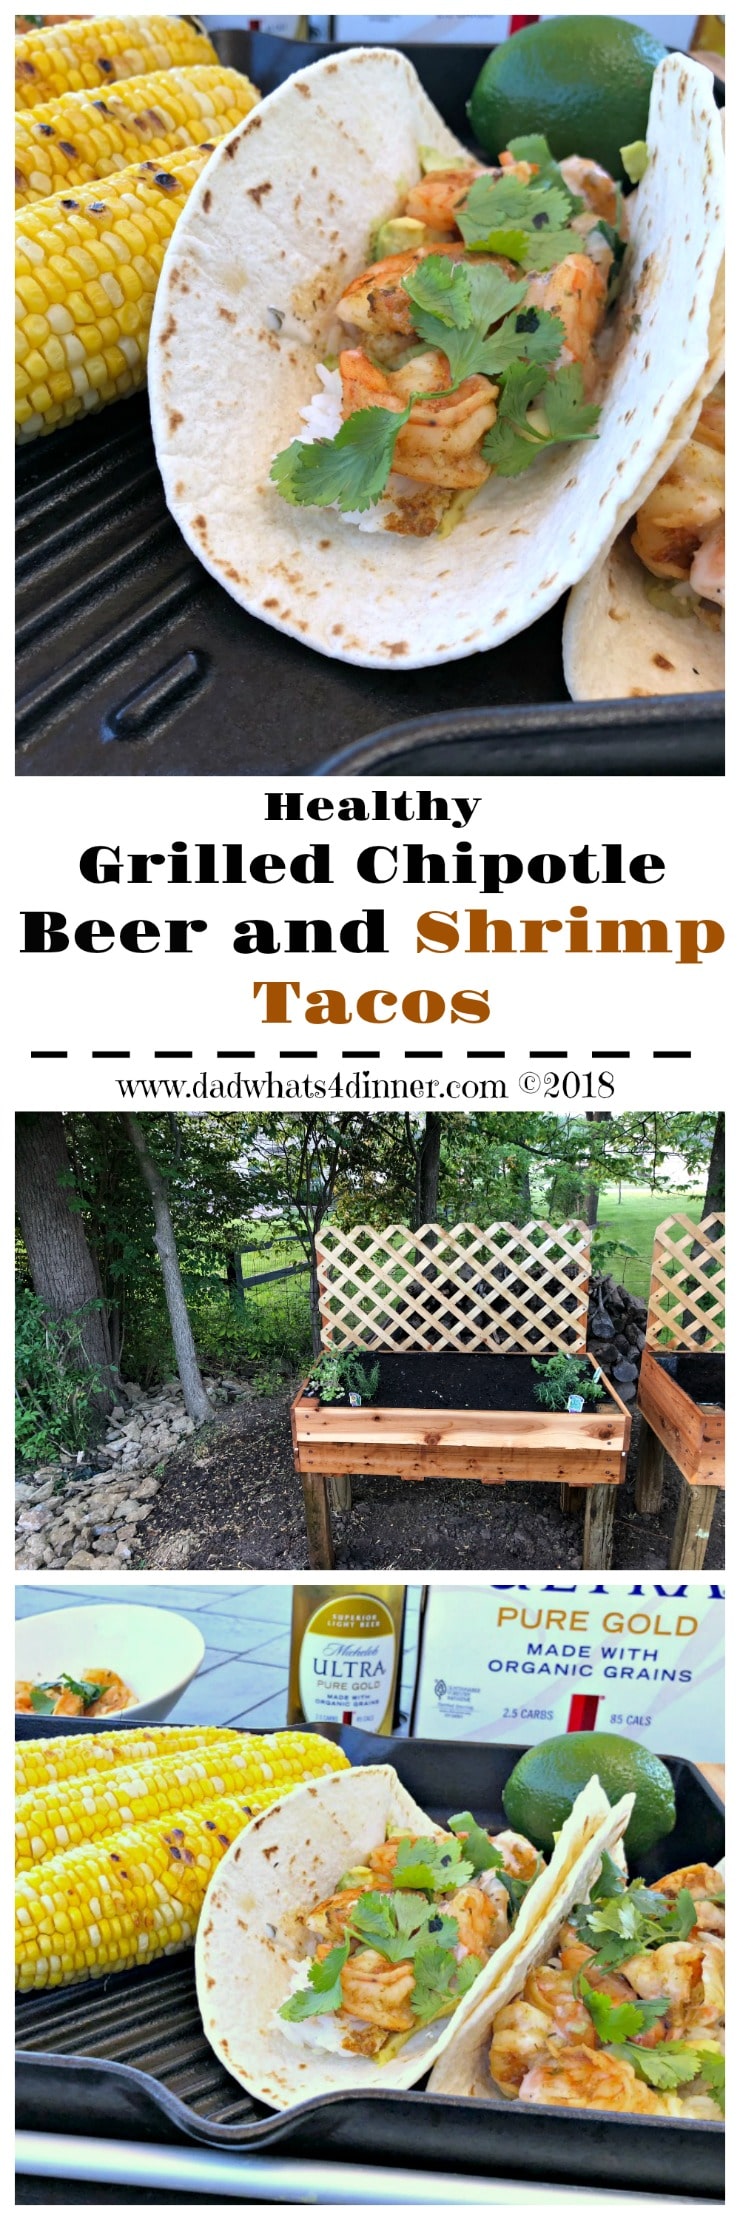 These healthy Grilled Chipotle Beer and Shrimp Tacos with avocado and rice are full of smokey spicy flavor and perfect for a light lunch when working outdoors in the summer. www.dadwhats4dinner #ad #Grilled #shrimp #grilling #foilpackcooking #healthy #avocado #beer #liveULTRA